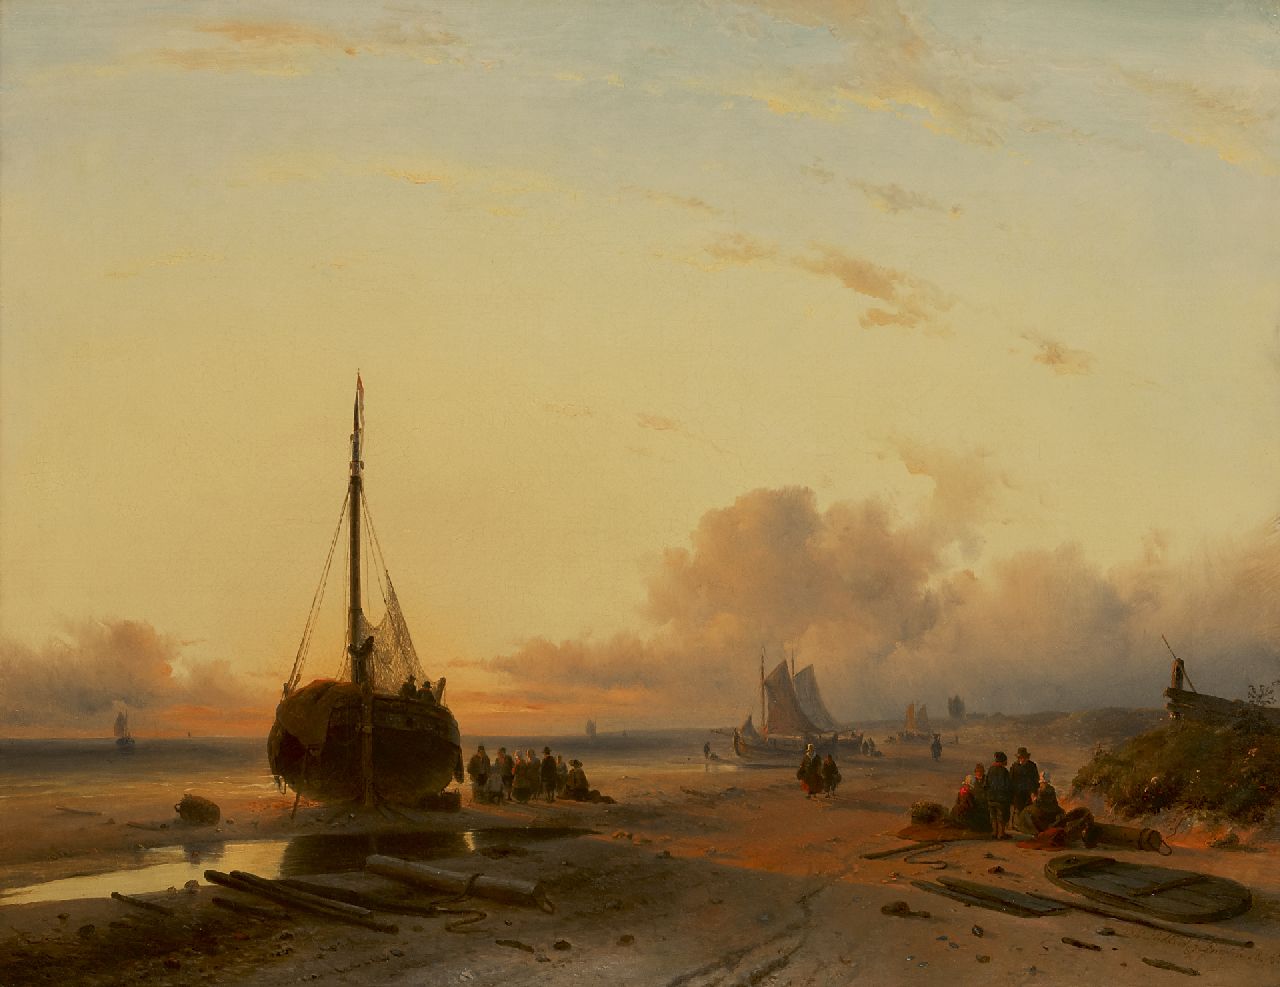 Leickert C.H.J.  | 'Charles' Henri Joseph Leickert, Fishing vessels on a beach at sunset, oil on canvas 58.0 x 75.0 cm, signed l.r. and dated 'London' 1845